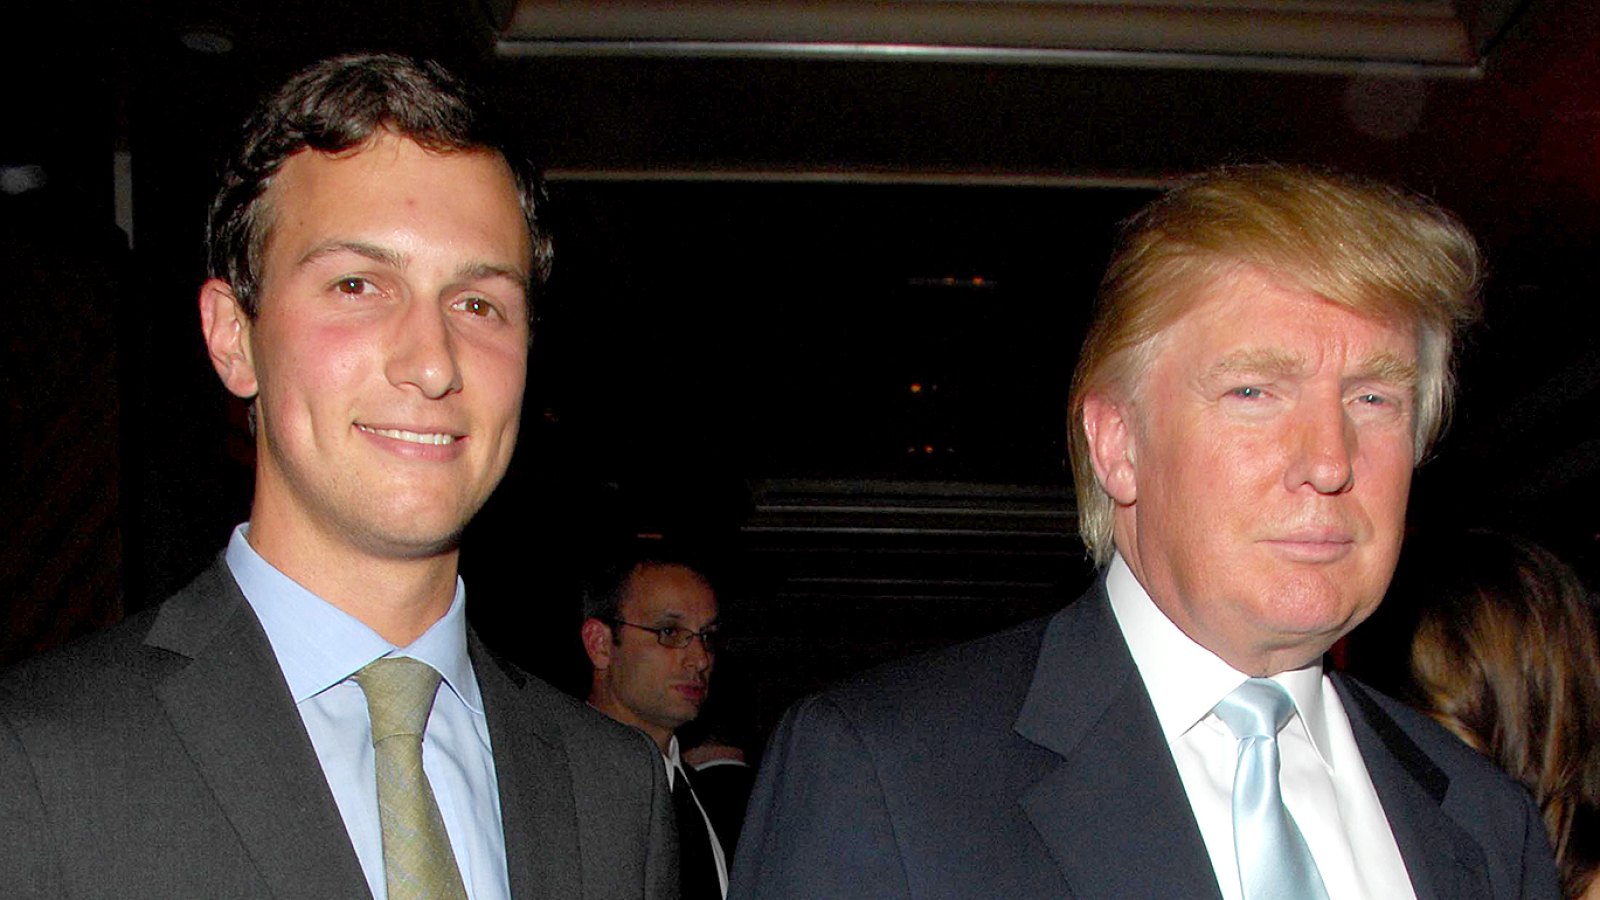 Jared Kushner and Donald Trump attend IVANKA TRUMP celebrates launch of IVANKA TRUMP FINE JEWELRY and opening of IVANKA TRUMP BOUTIQUE at Country at Carlton Hotel on September 20, 2007 in New York City.